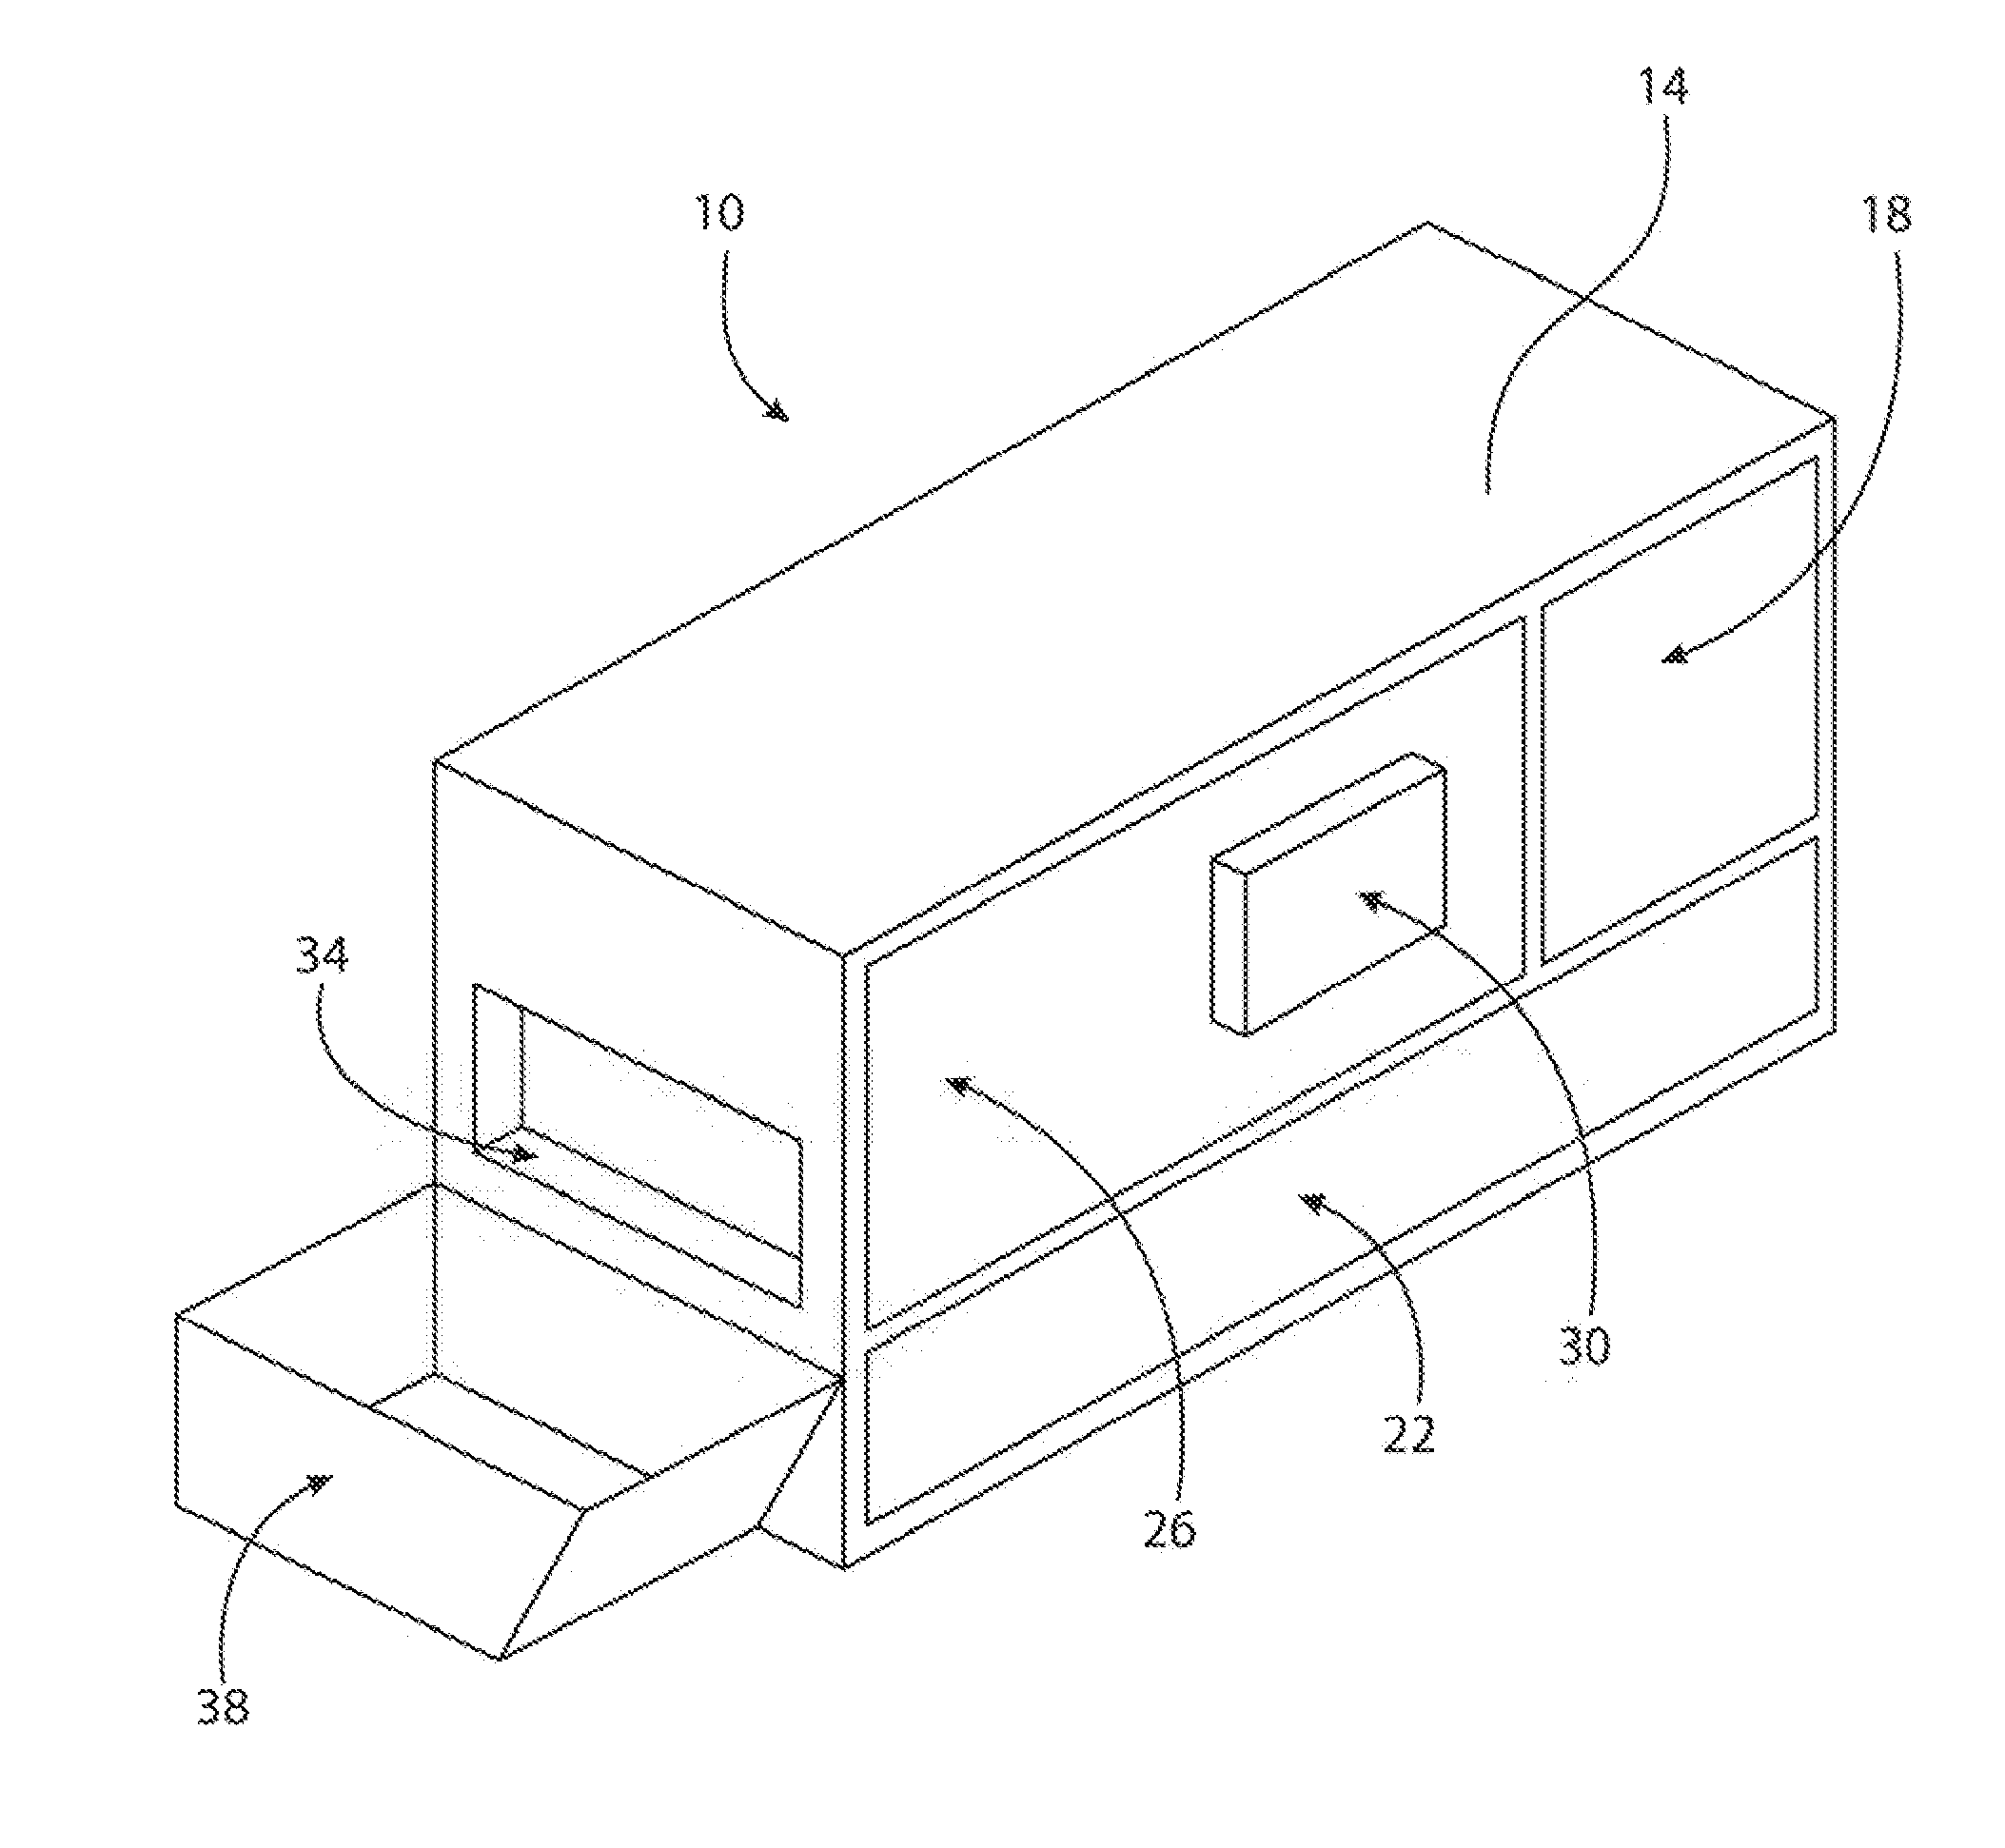 Food cooking apparatus and method